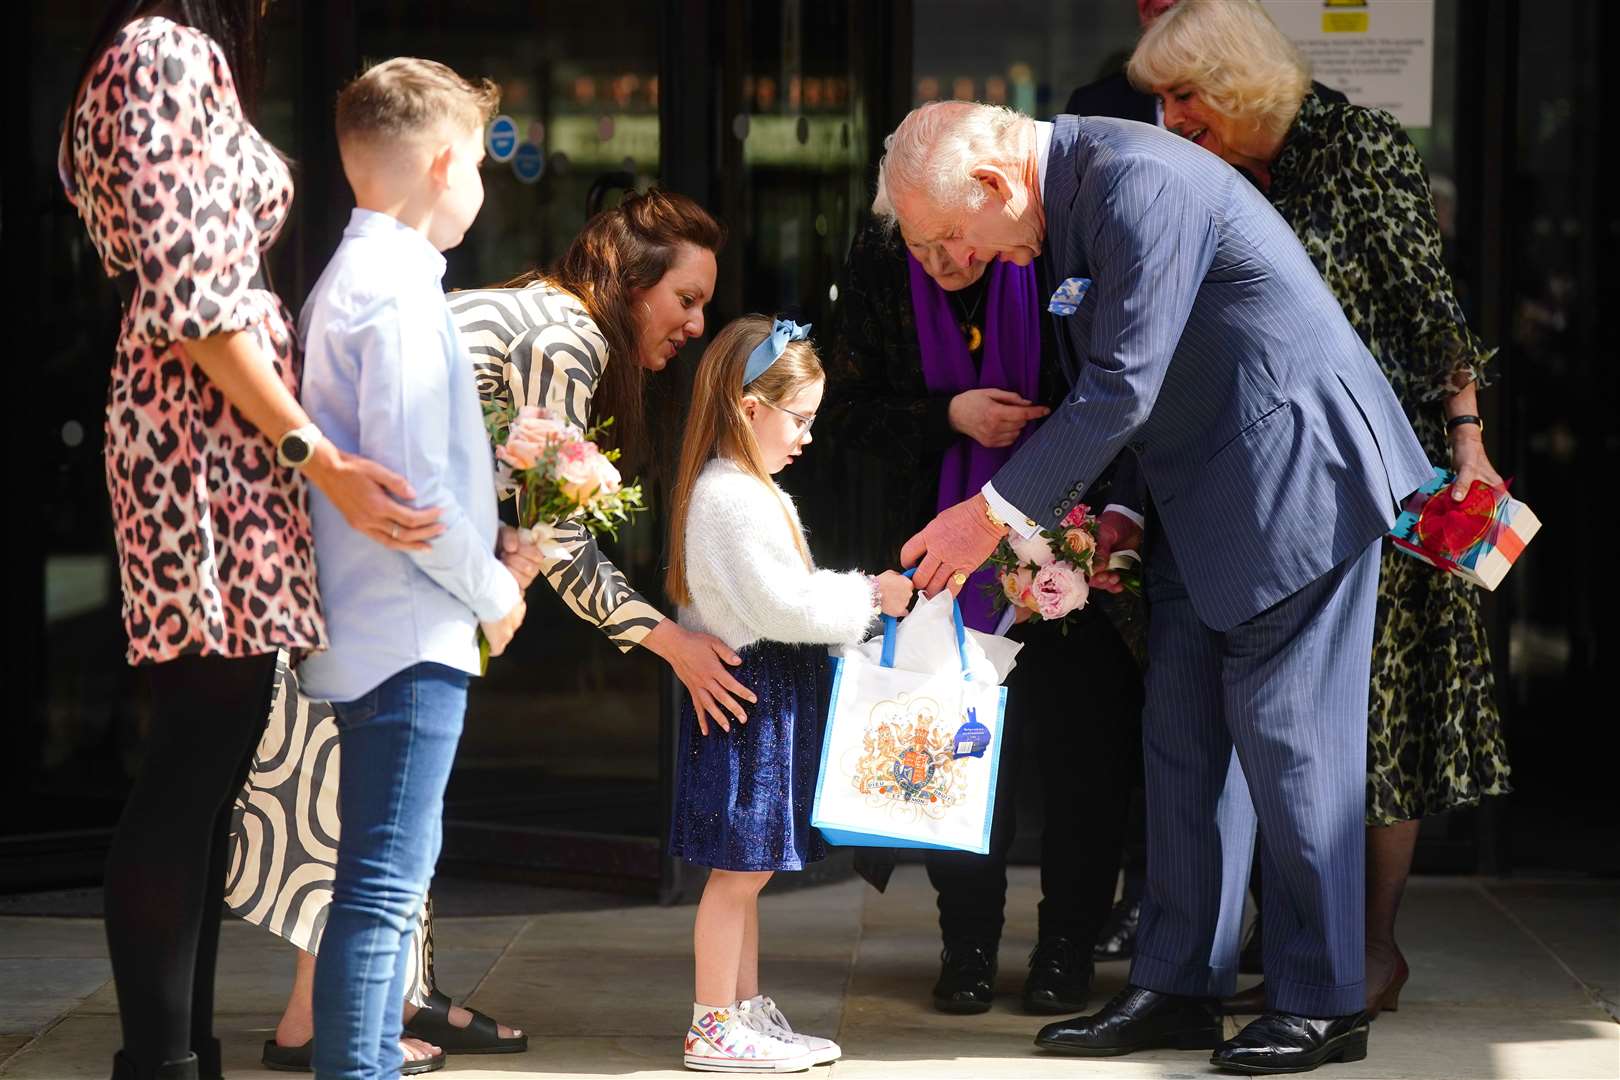 The King is presented with a bouquet following a visit to University College Hospital Macmillan Cancer Centre (Victoria Jones/PA)